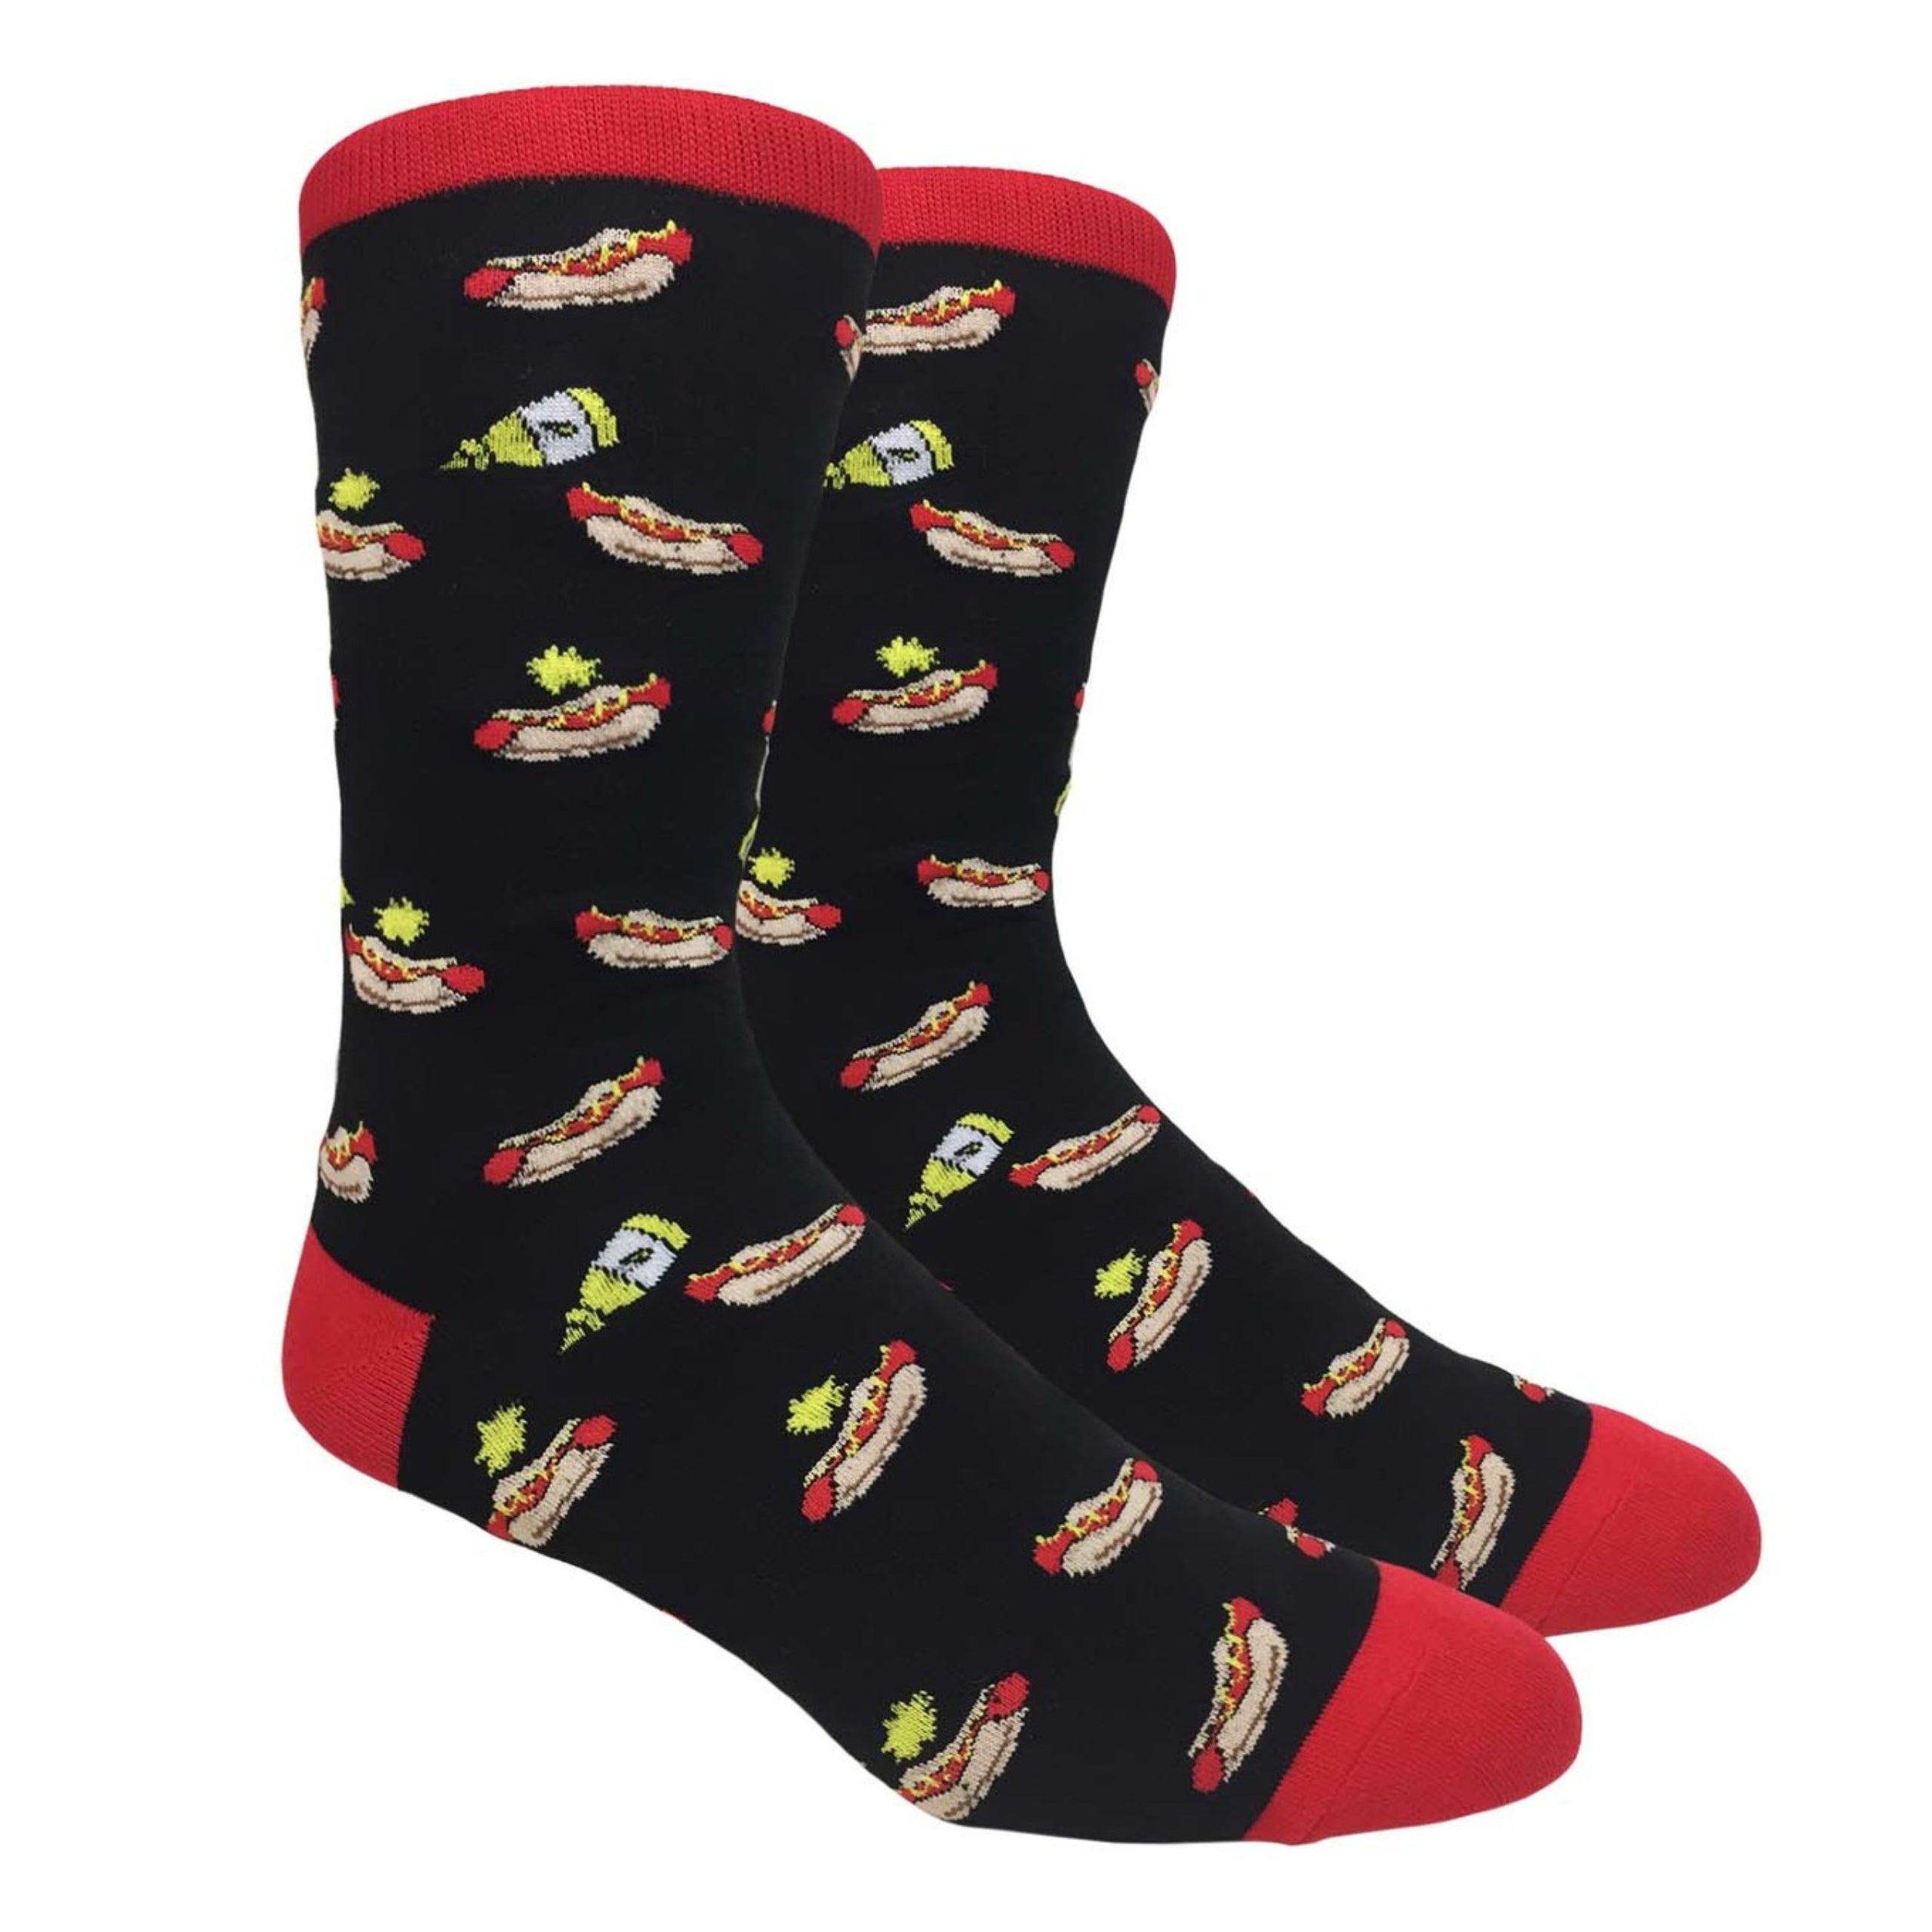 Hot Dogs and Mustard Socks